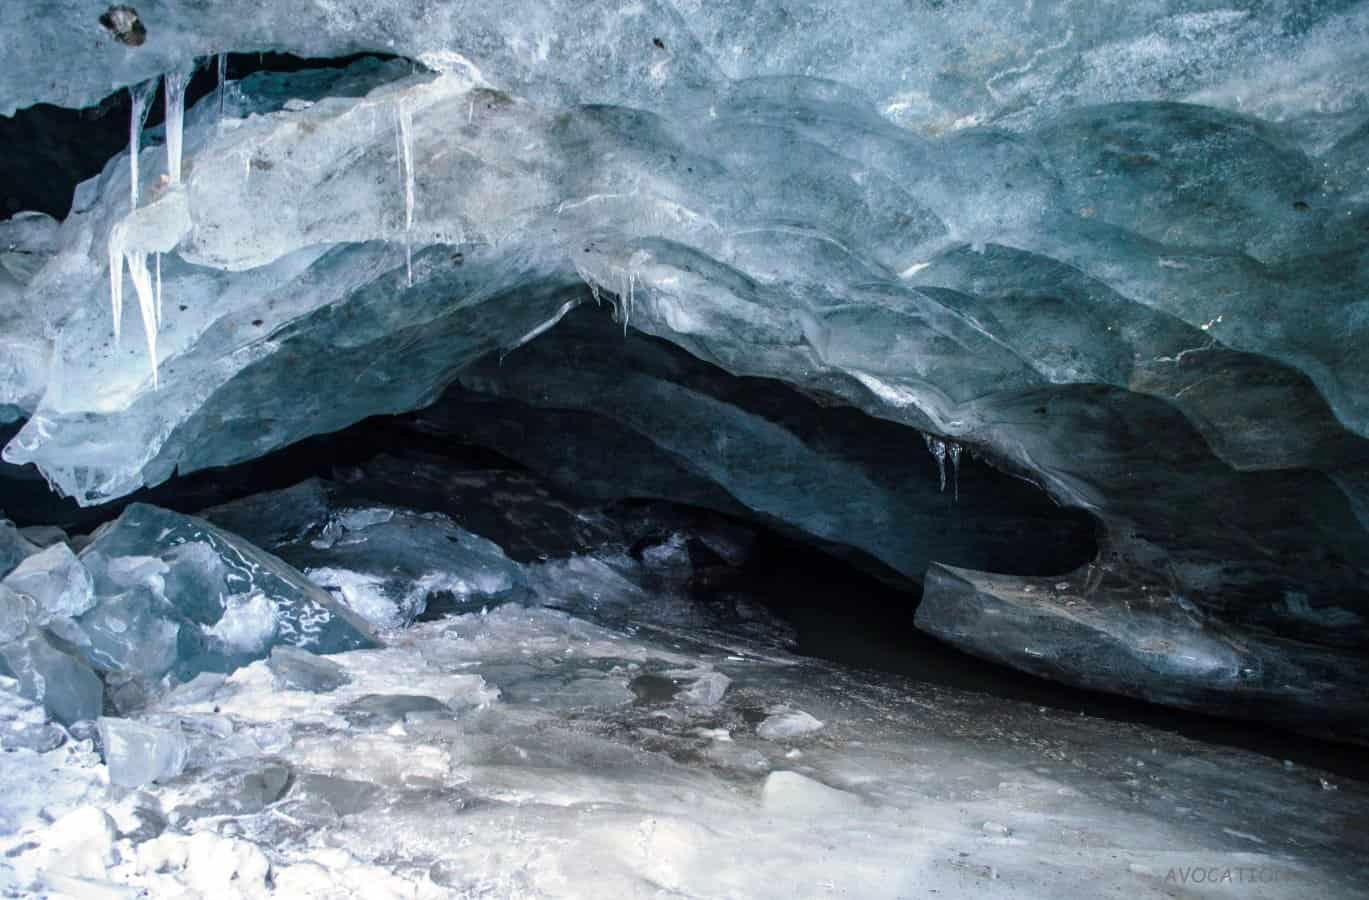 Inside Baspa Glacier snout. Looks so small, but it was too scary and large to even stand here and click. [Lamkhaga pass expedition 2015]